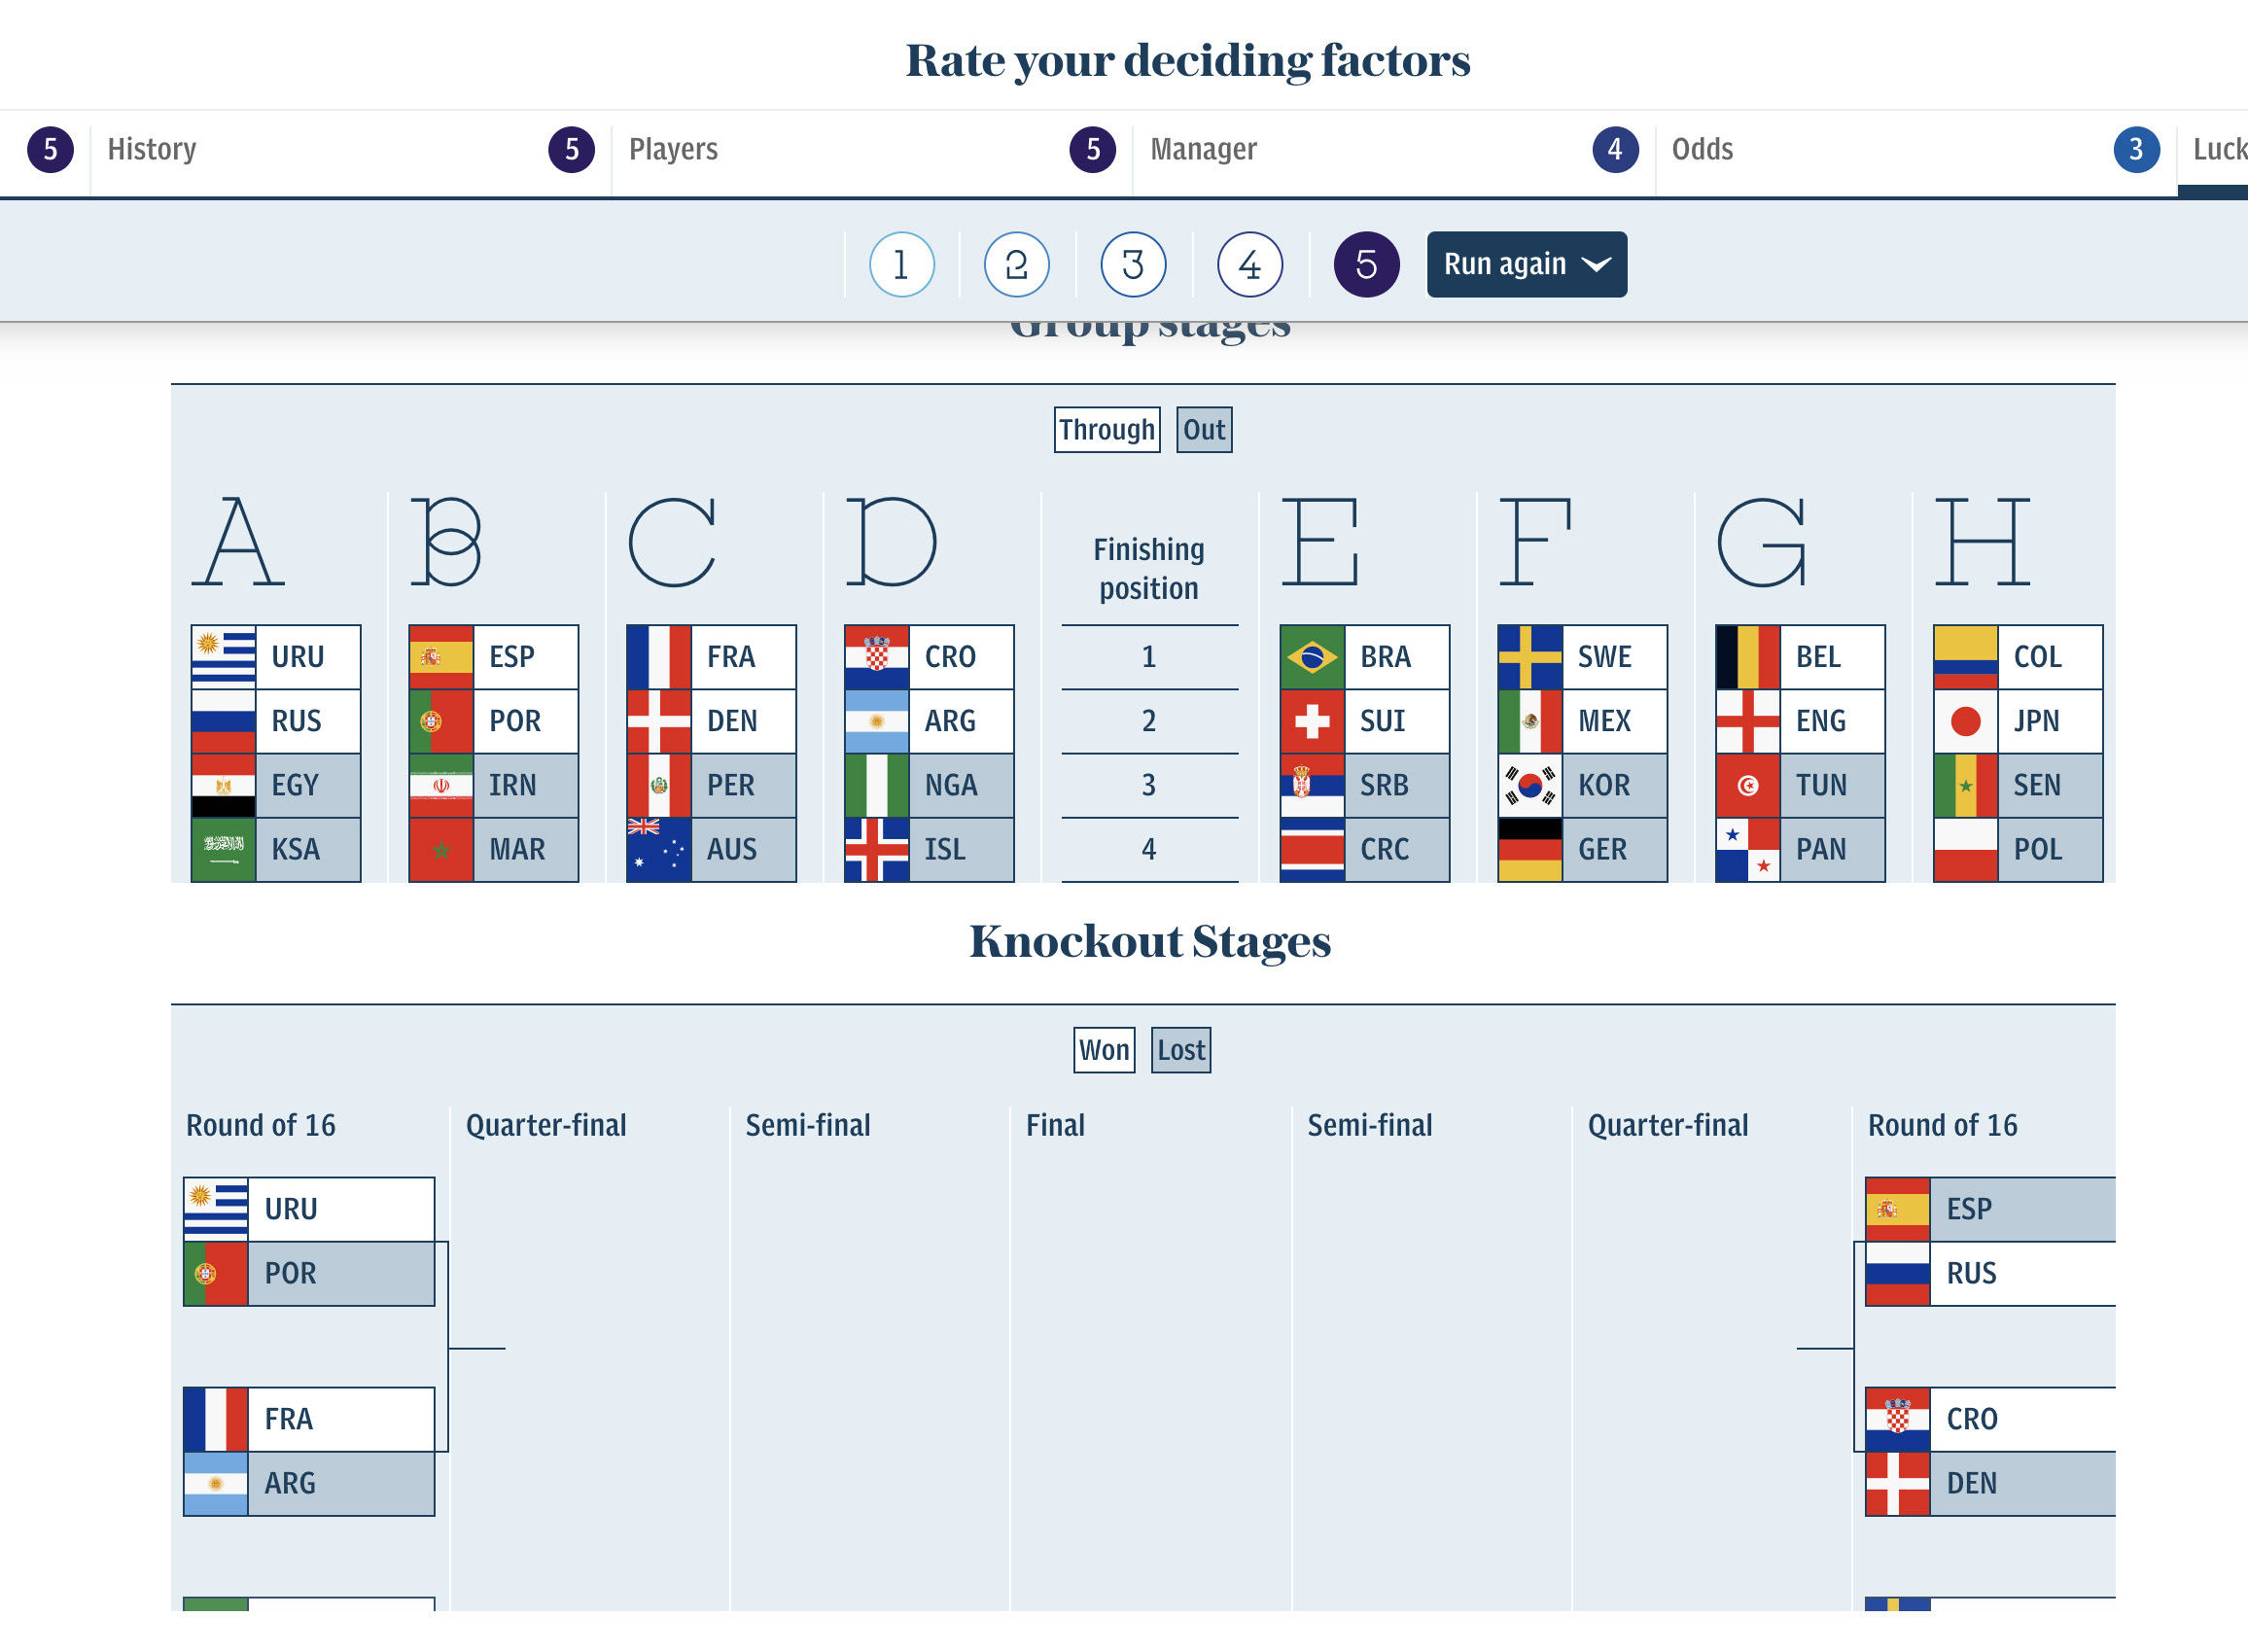 Rate your deciding factors and find out who will be the World Cup champion 